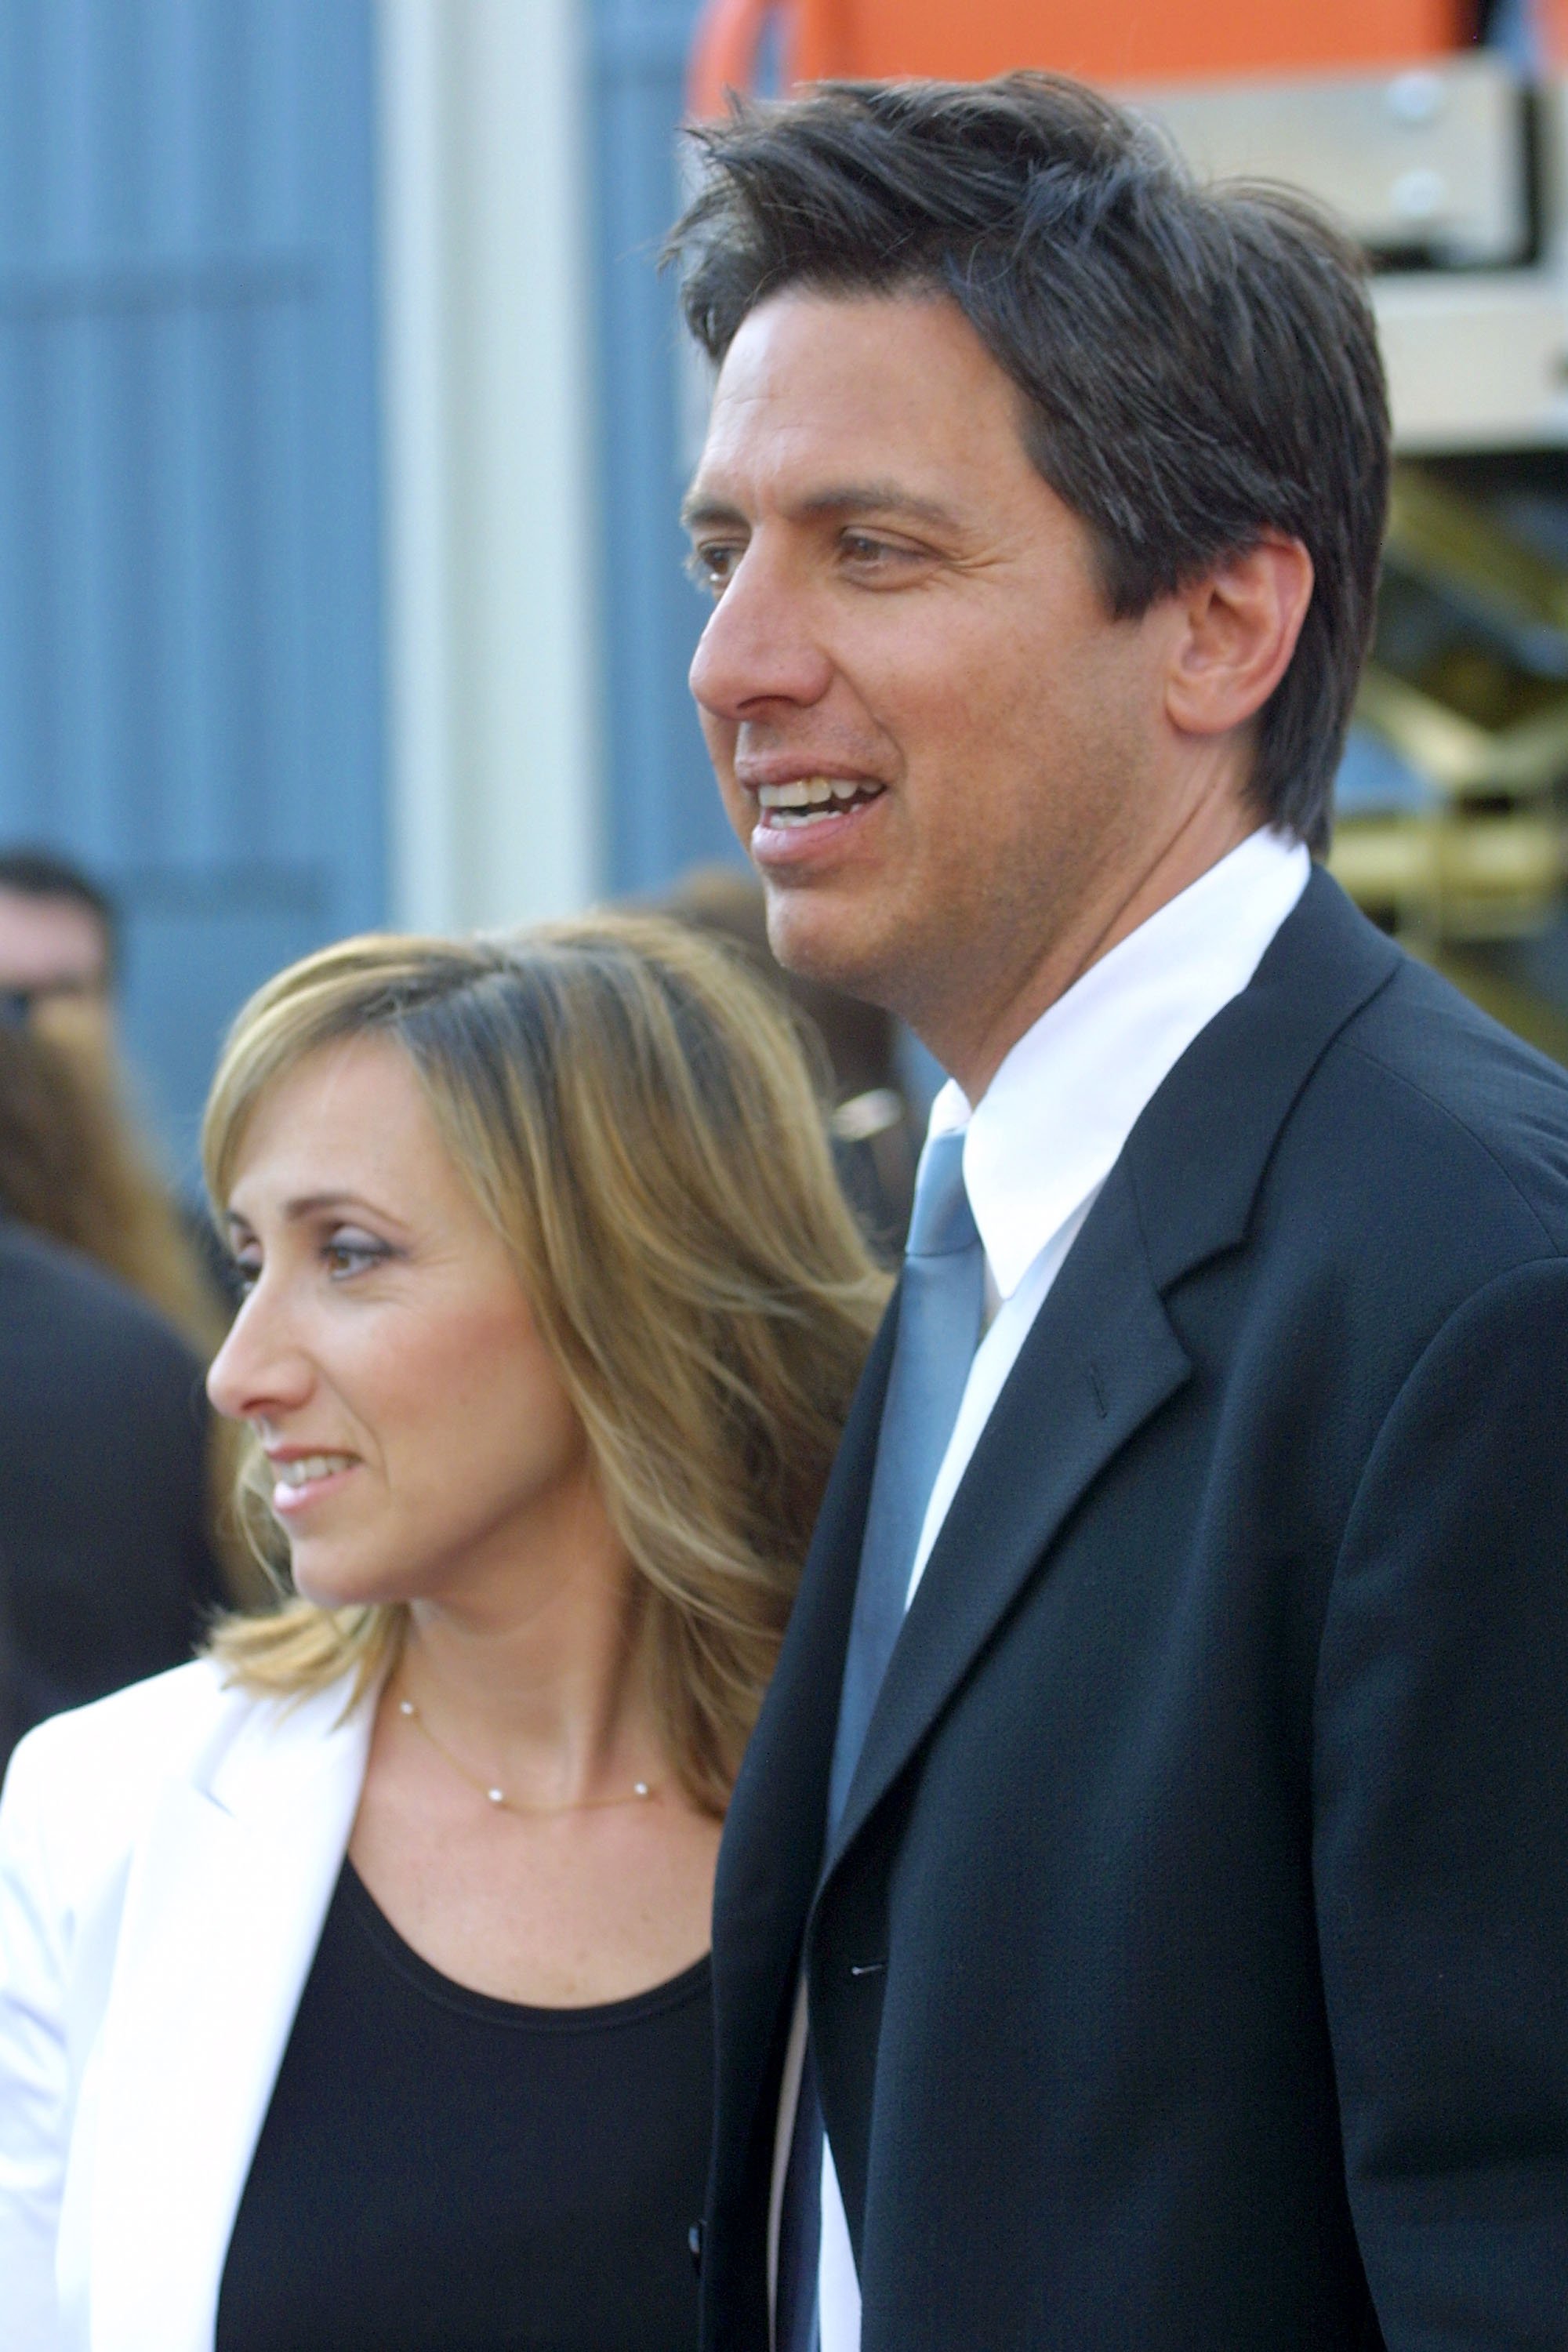 Actor Ray Romano and his wife Anna Scarpulla arrive at the series wrap party of "Everybody Loves Raymond" at Hanger 8 on April 28, 2005 in Santa Monica, California | Source: Getty Images